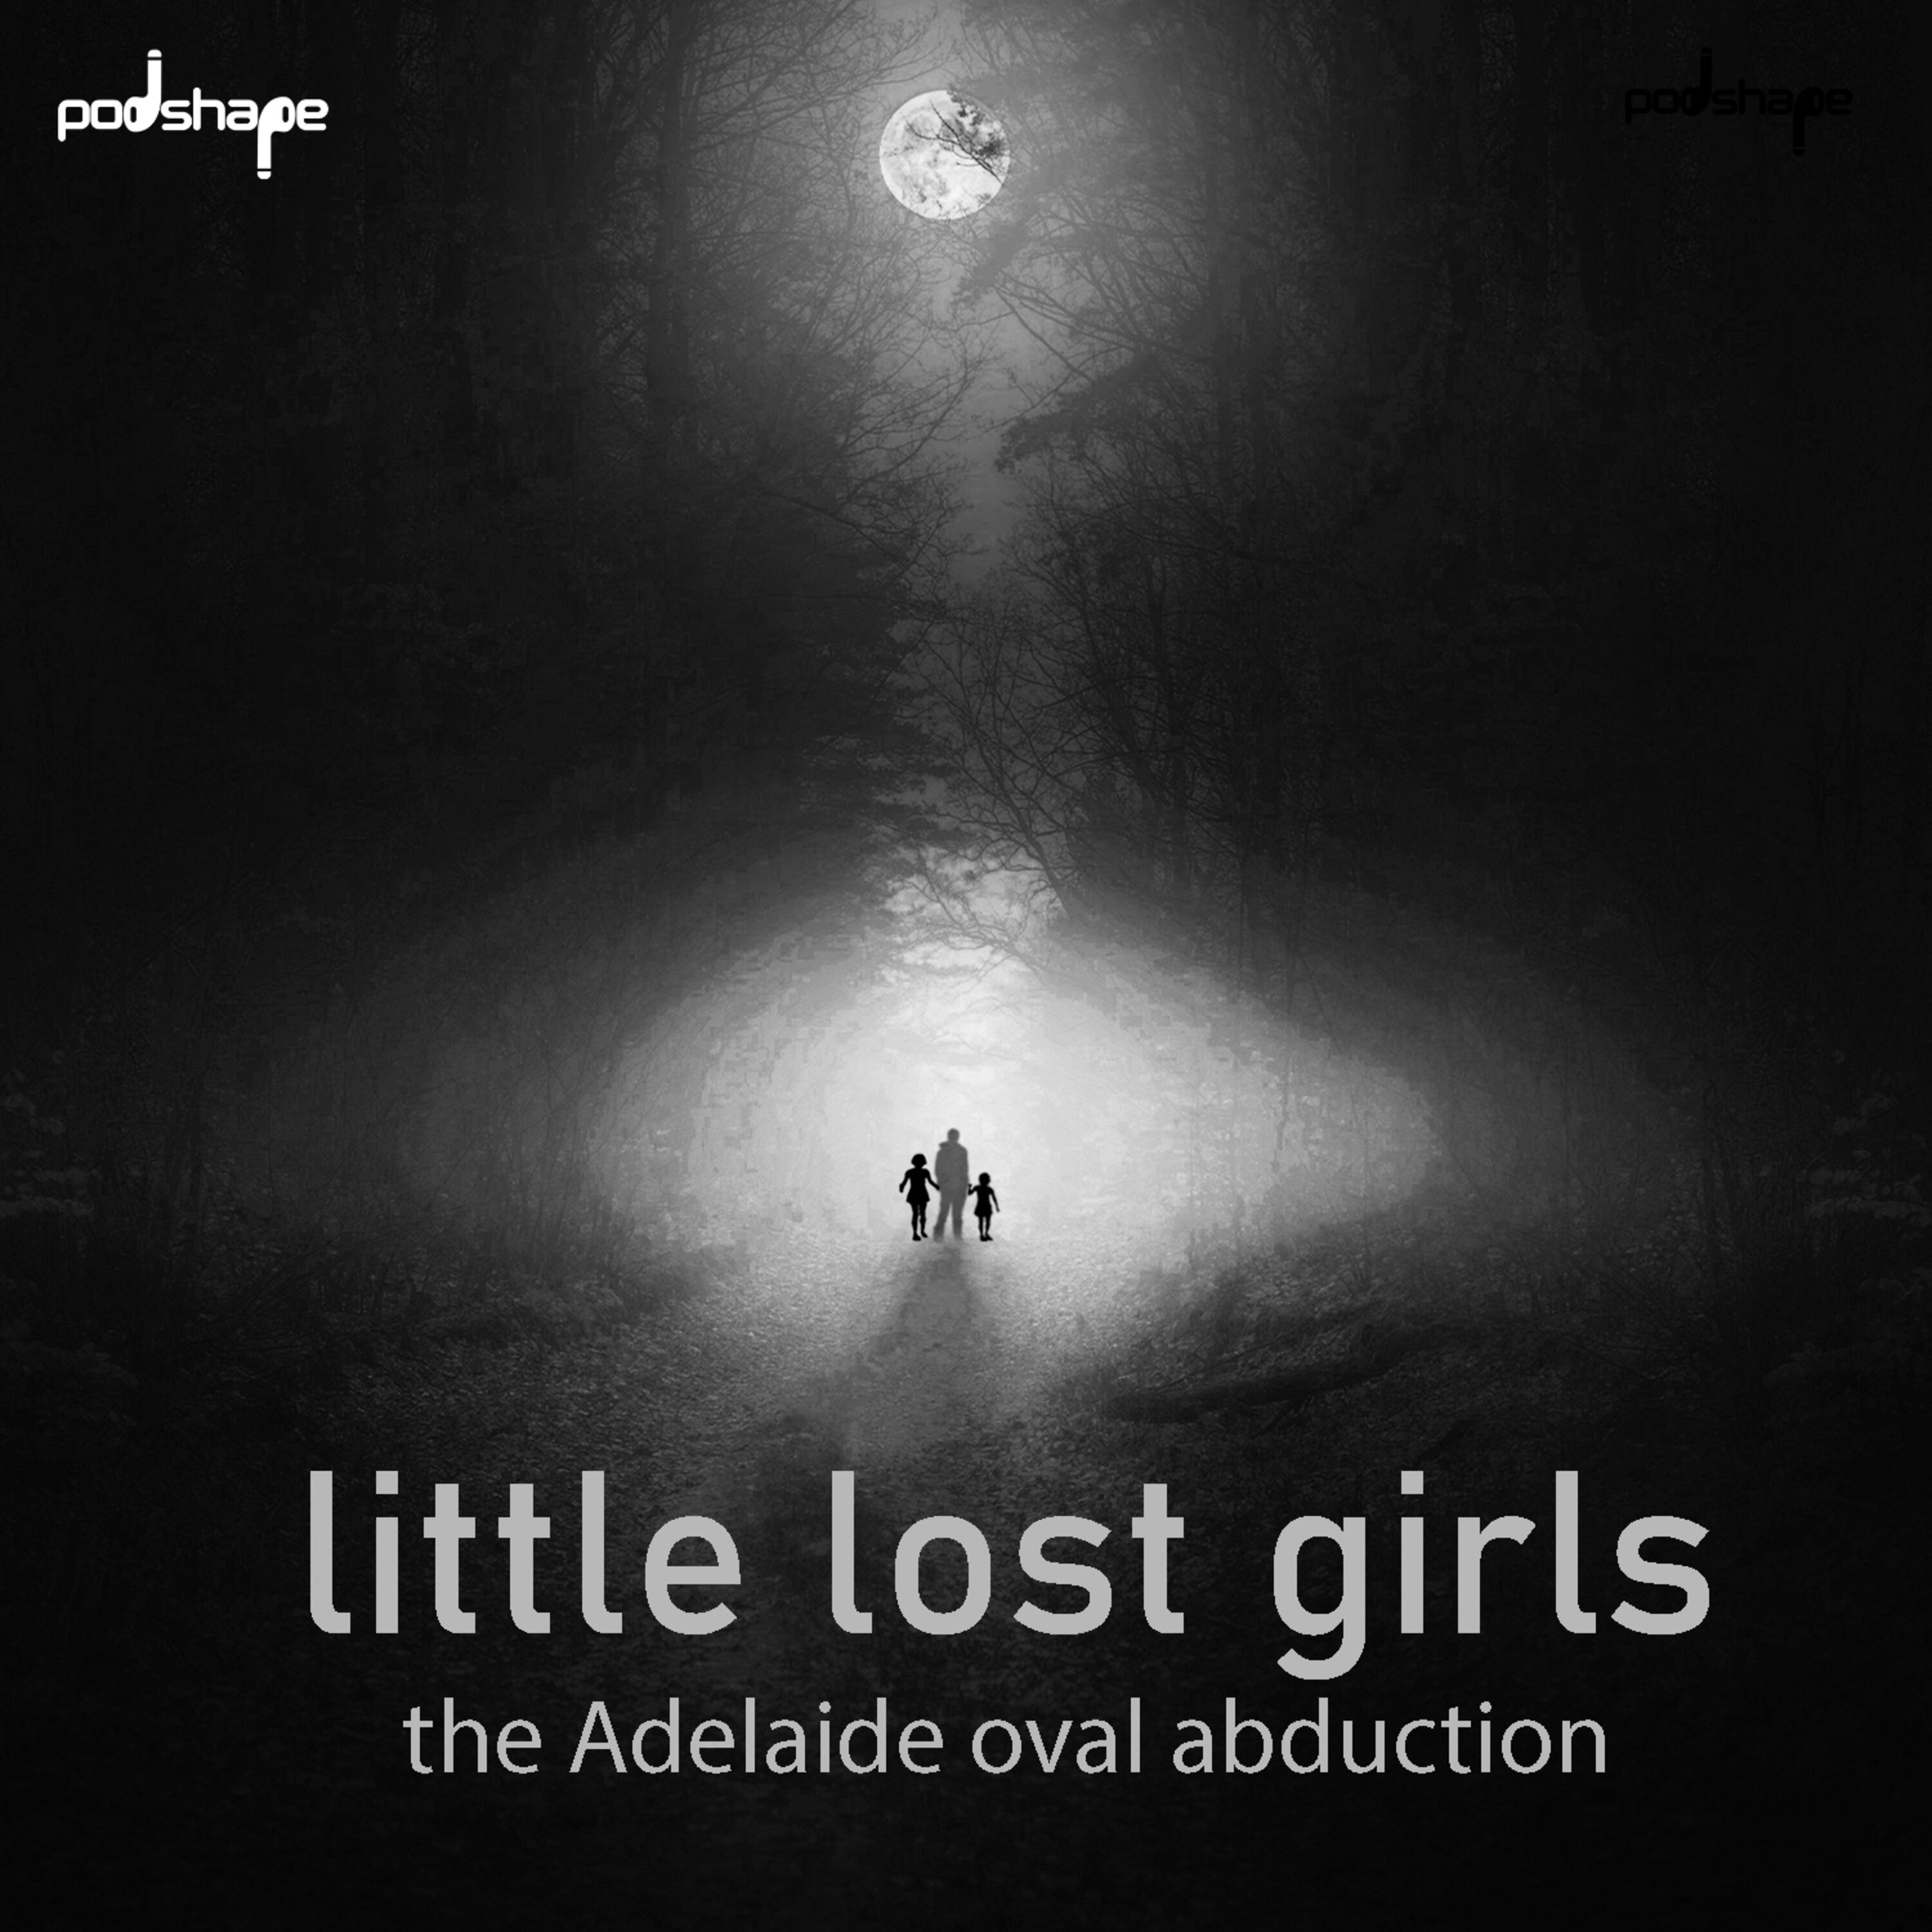 Introducing - Little lost girls